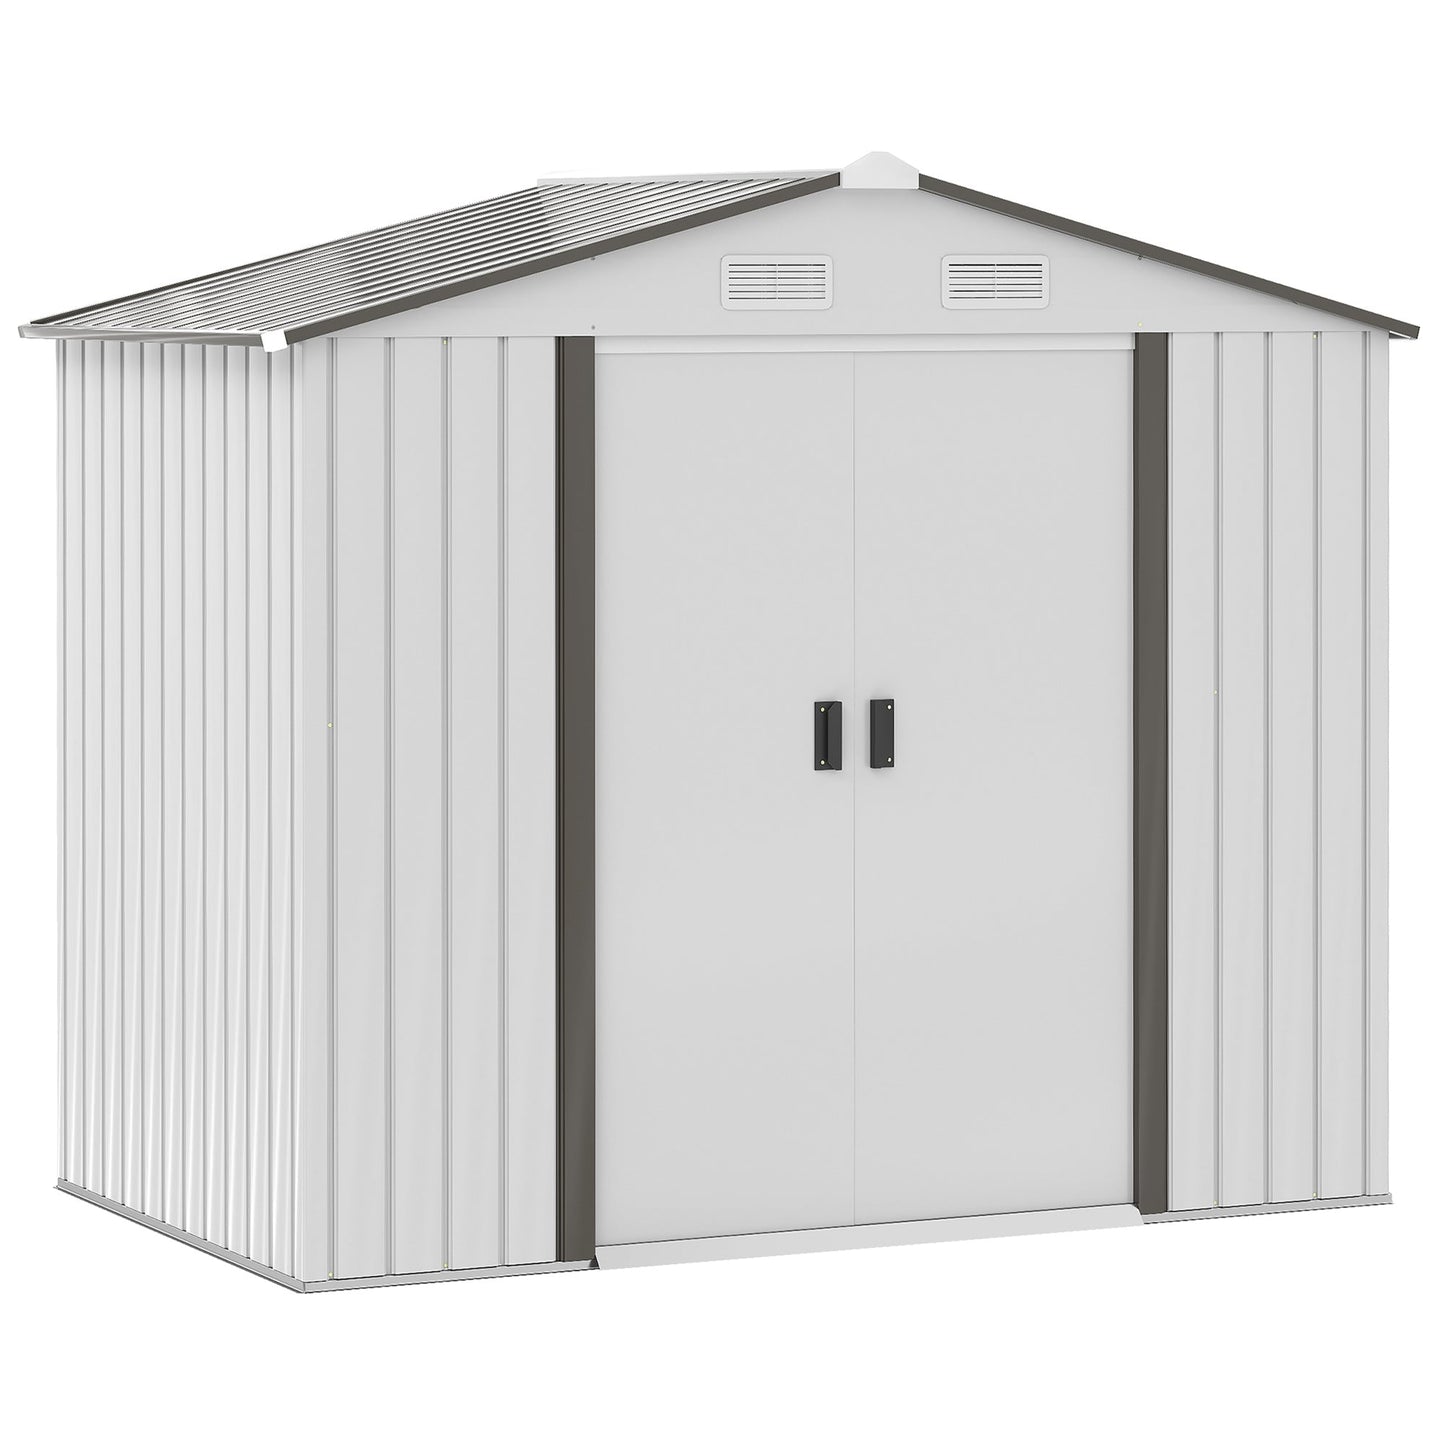 Outdoor and Garden-7' x 4' x 6' Garden Metal Shed & Tin Garden shed with 4 Vents for Airflow & 2 Easy Sliding Doors, White - Outdoor Style Company